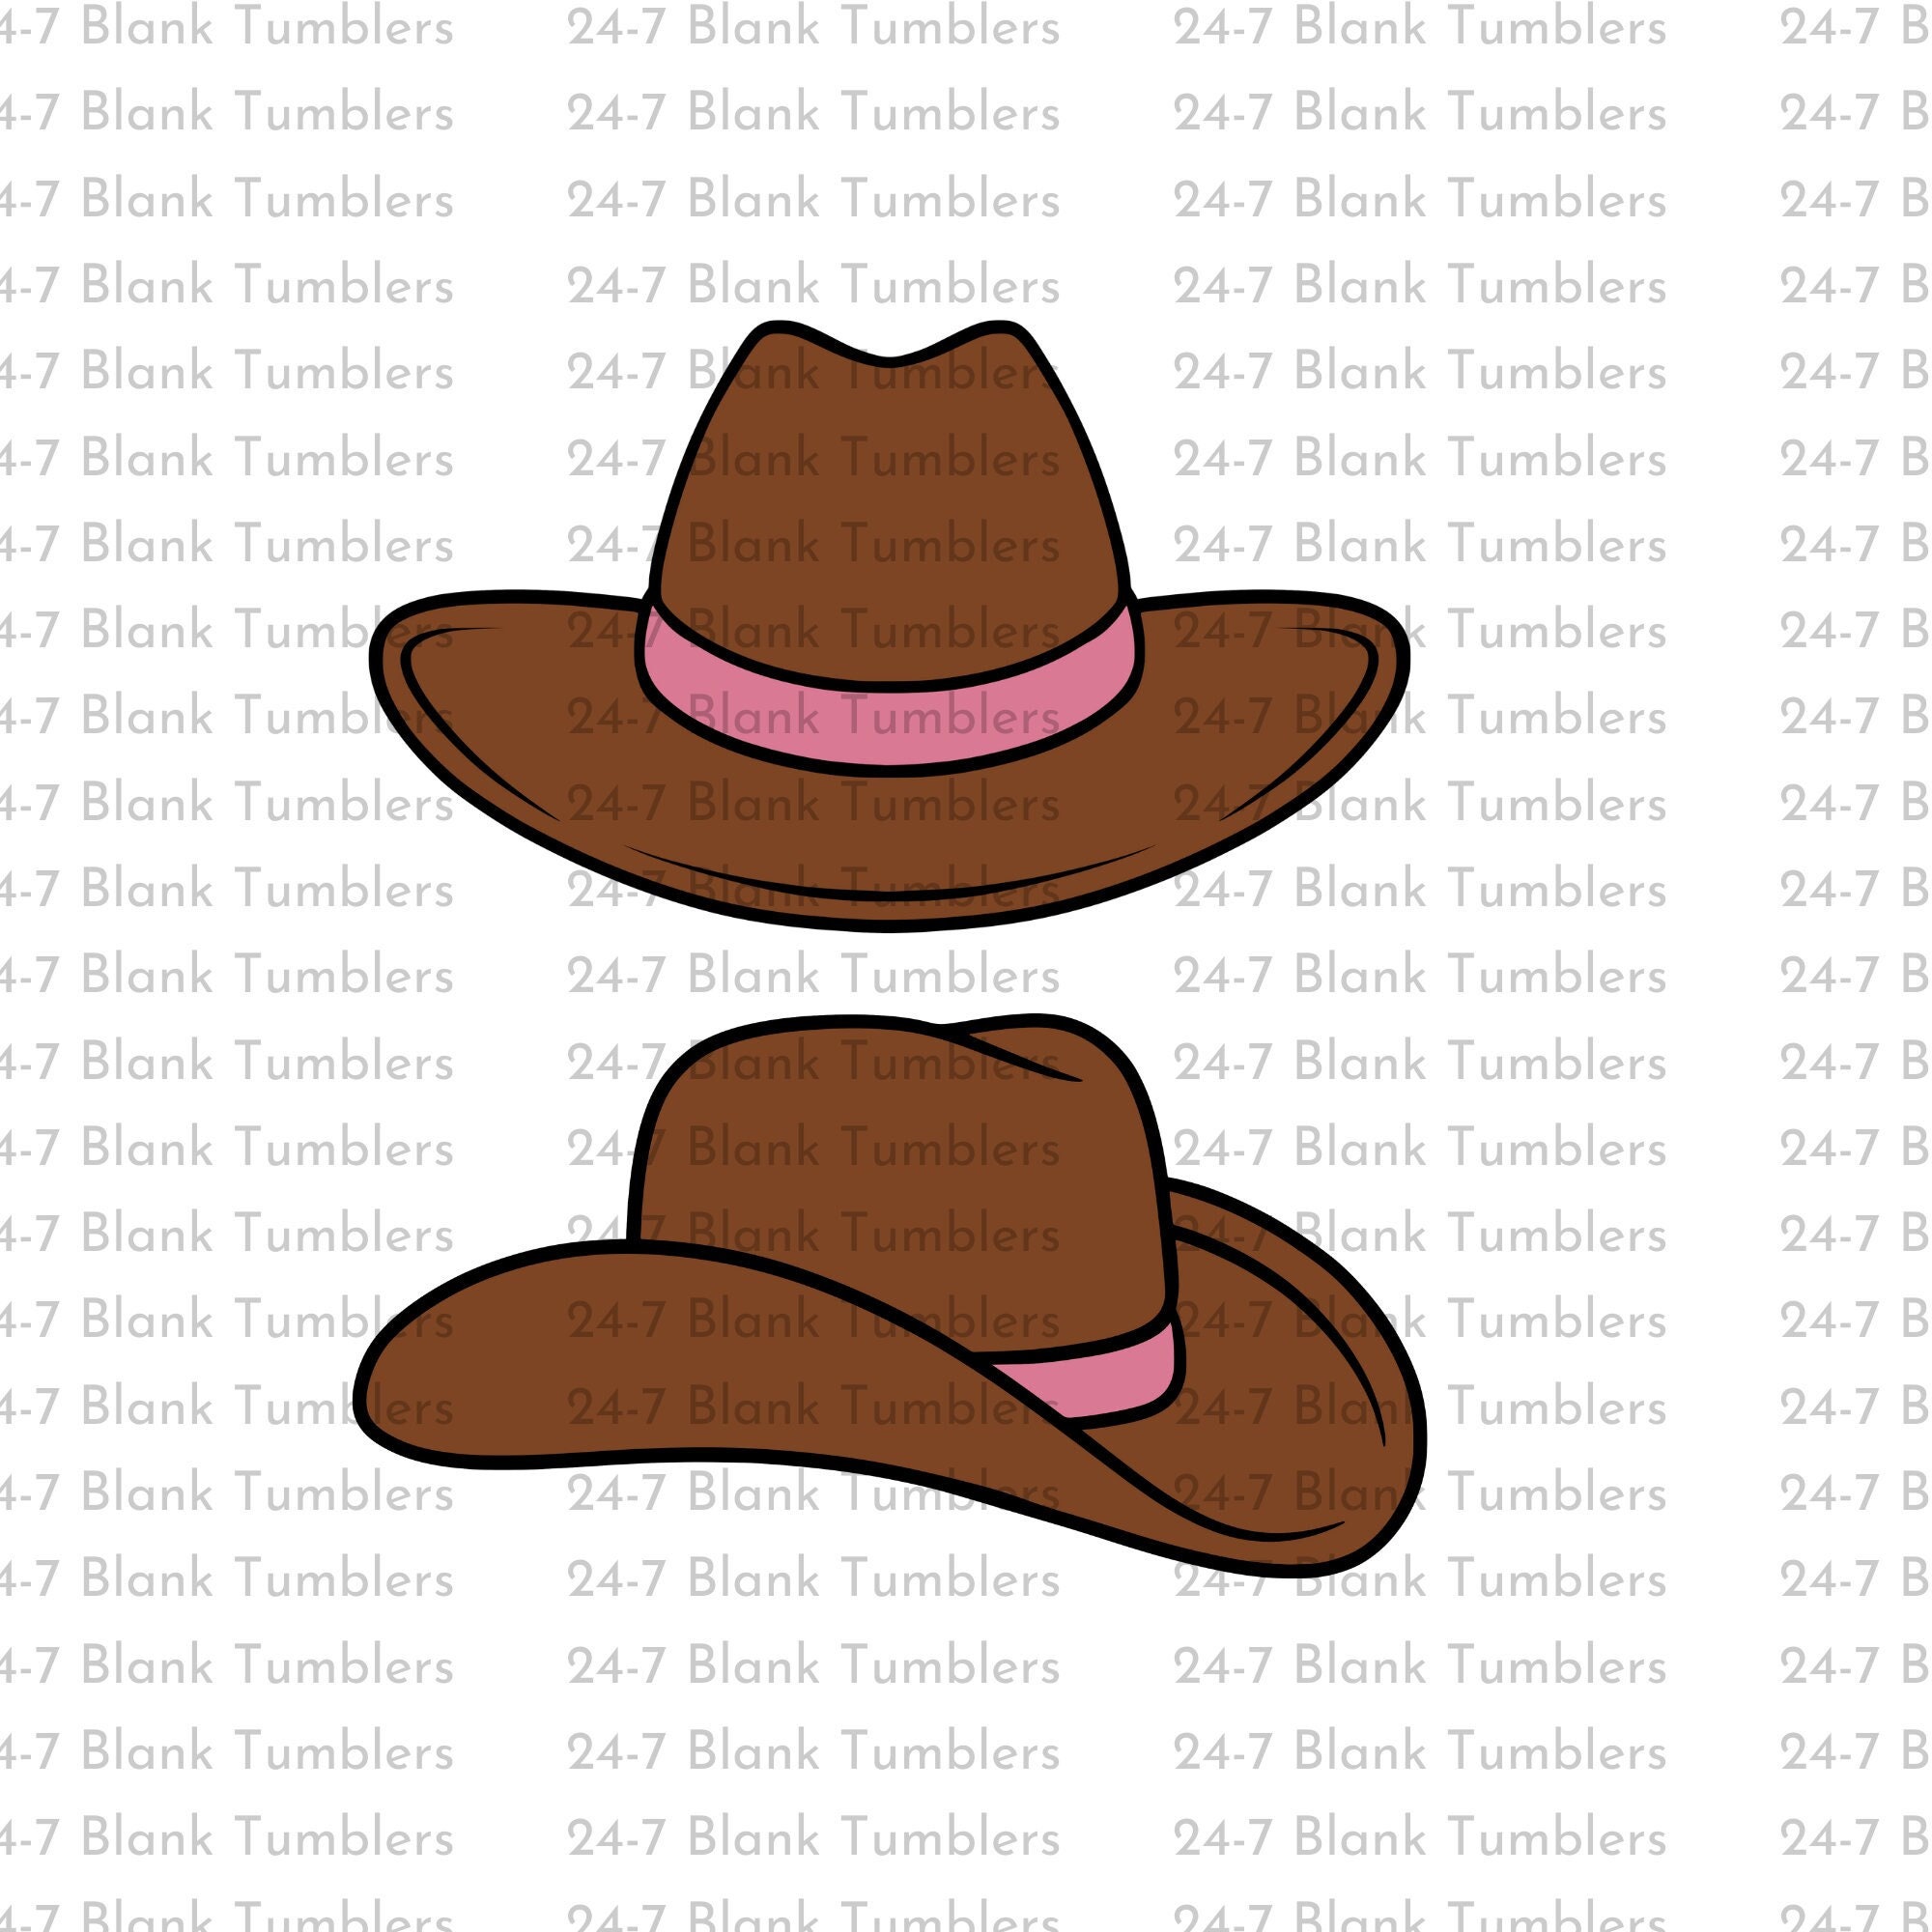 Cowboy Hat - $3.99 : SVGCuts - SVG files for your cutting machine